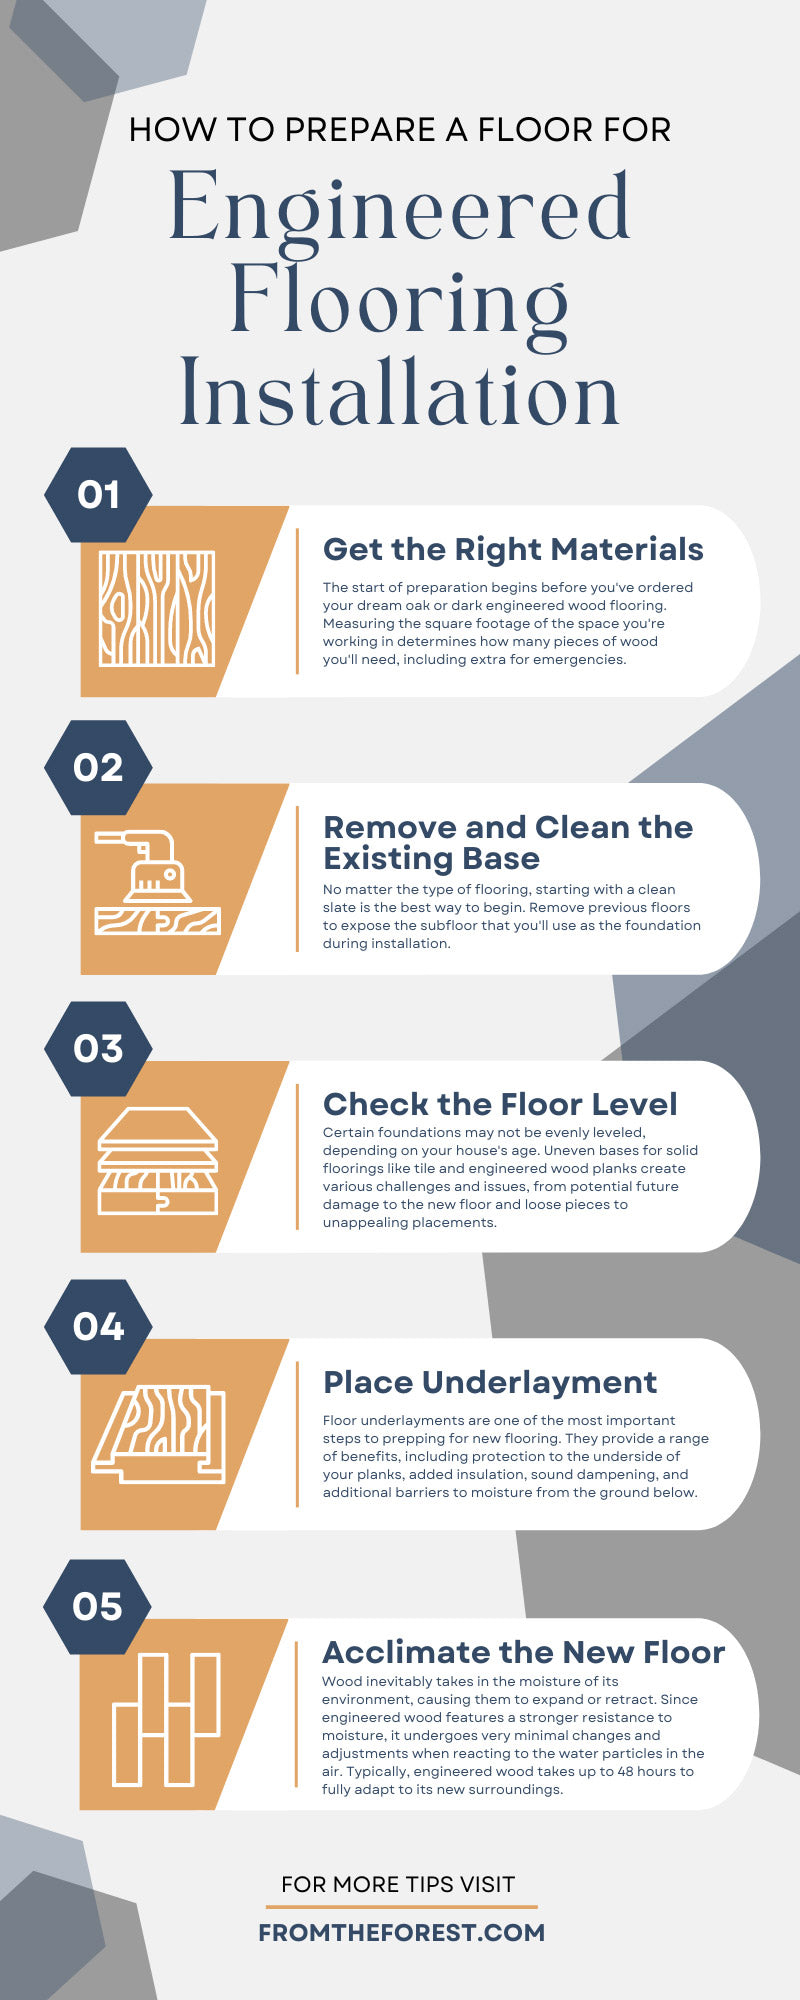 How To Prepare a Floor for Engineered Flooring Installation